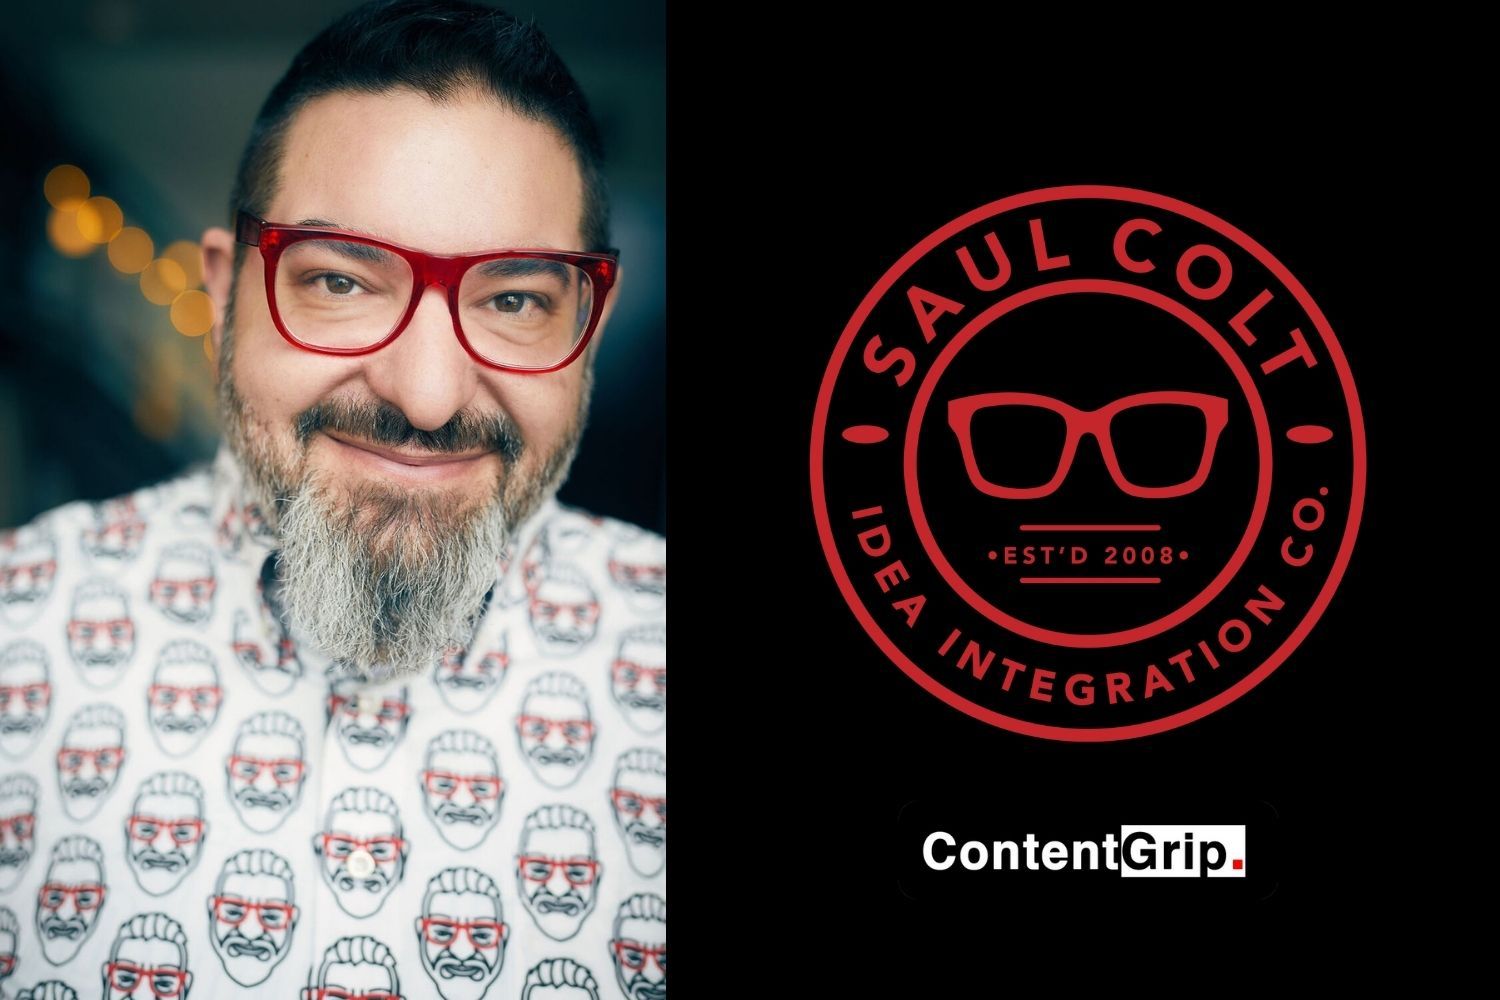 The Idea Integration Co. CMO Saul Colt on the importance of word-of-mouth marketing